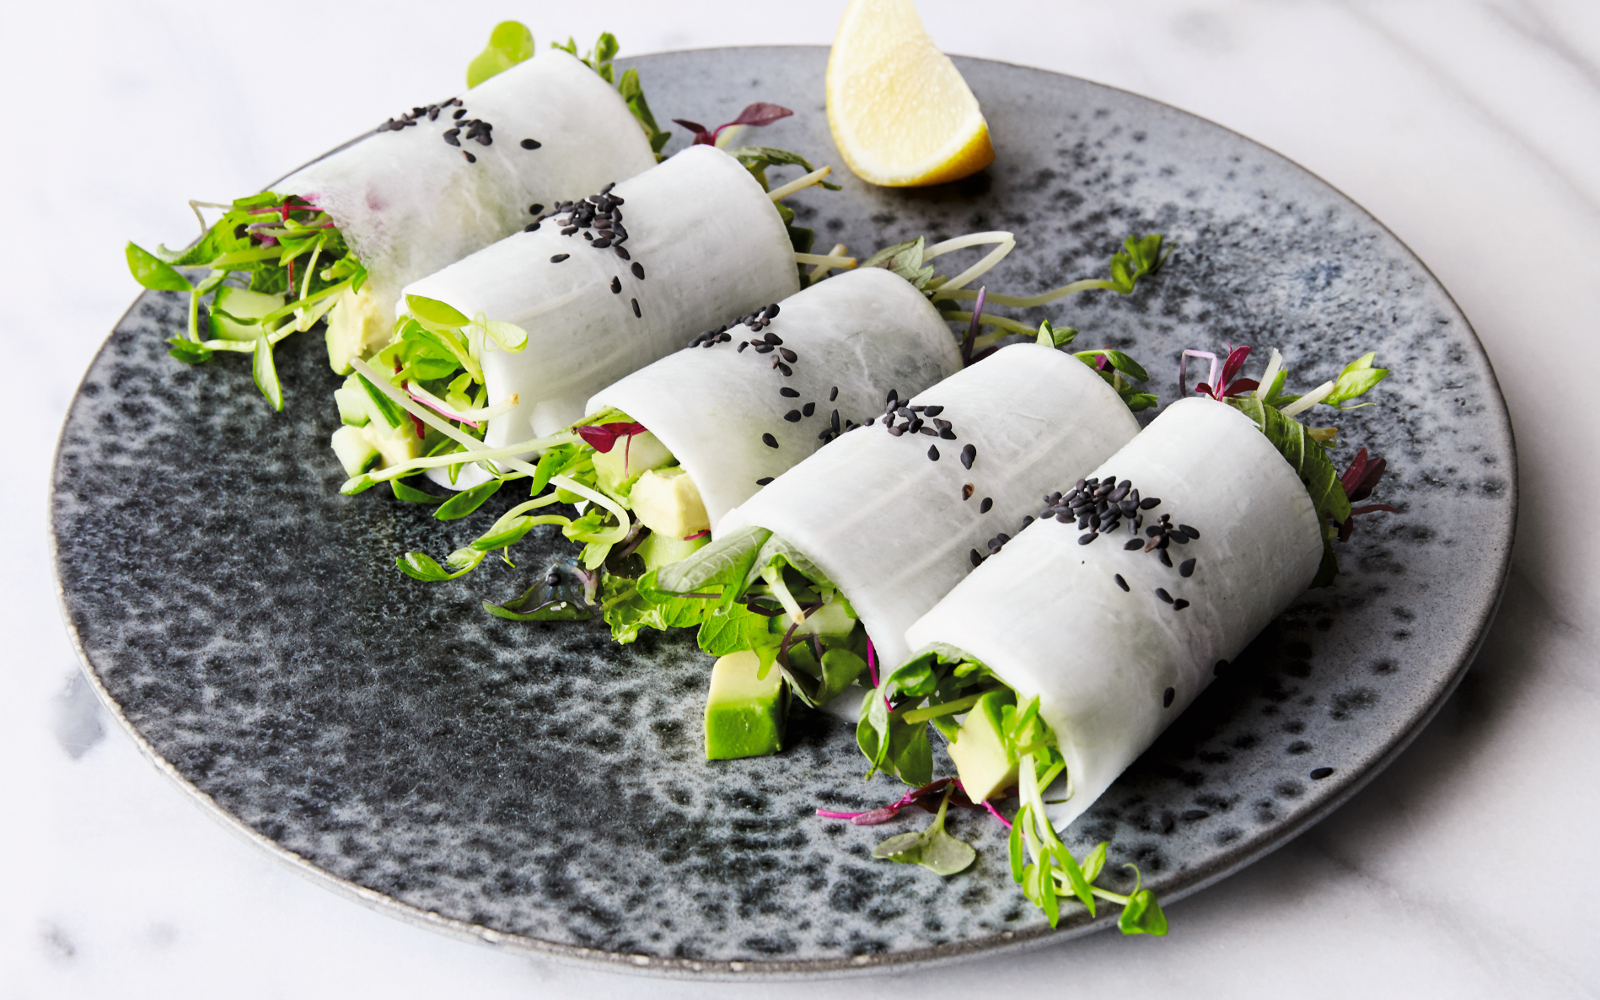 Summer Daikon Rolls With Avocado and Micro Greens